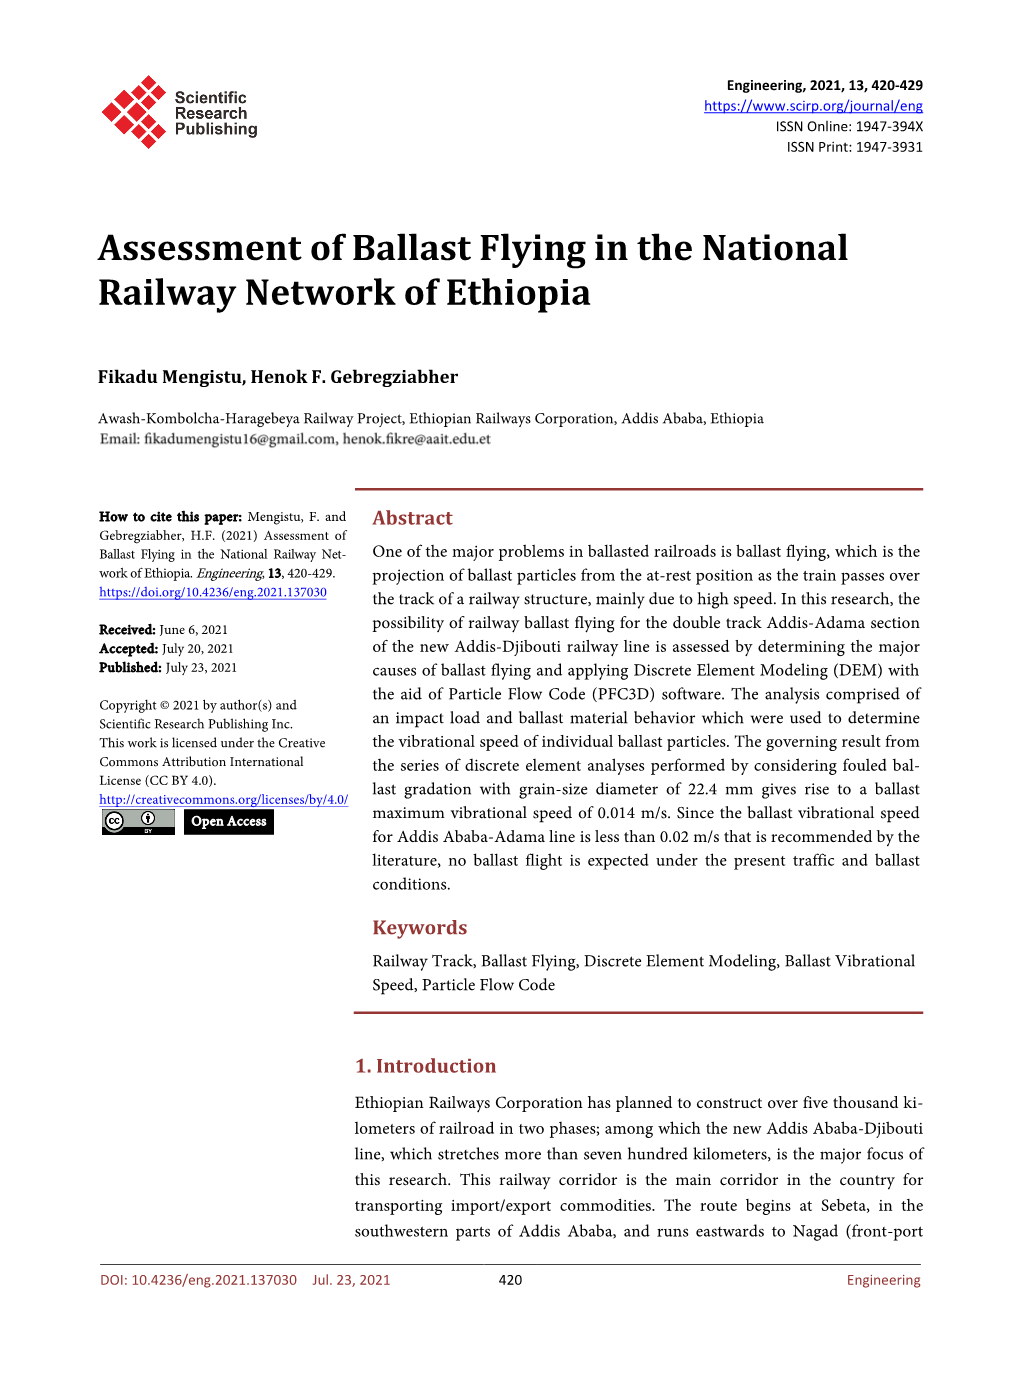 Assessment of Ballast Flying in the National Railway Network of Ethiopia